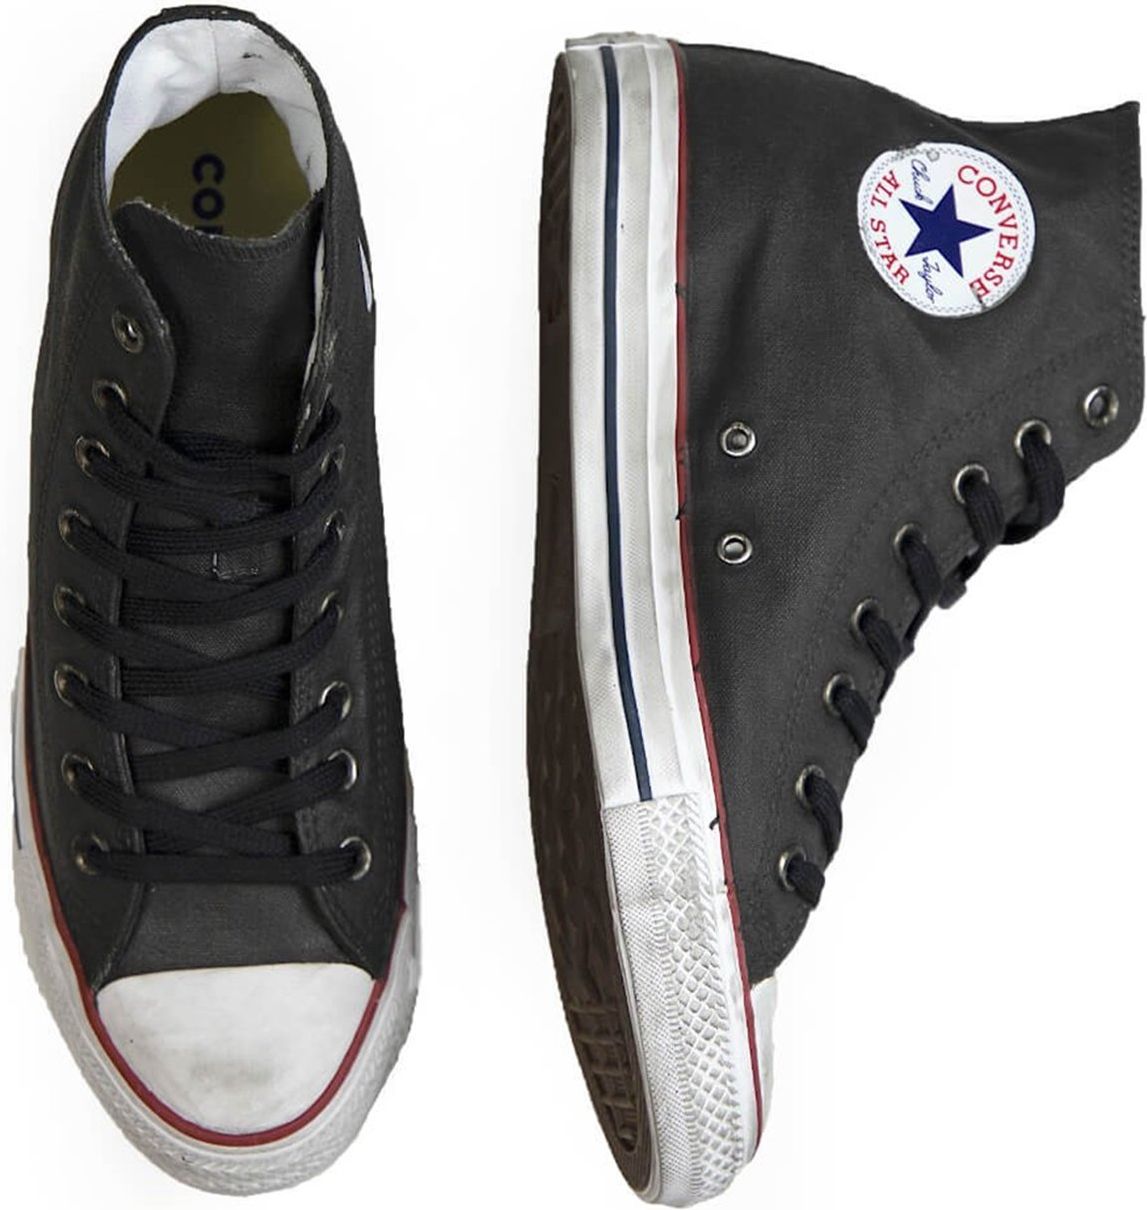 Converse Chuck Taylor All Star Waxed Anthracite Grey Sneaker Gray Grijs